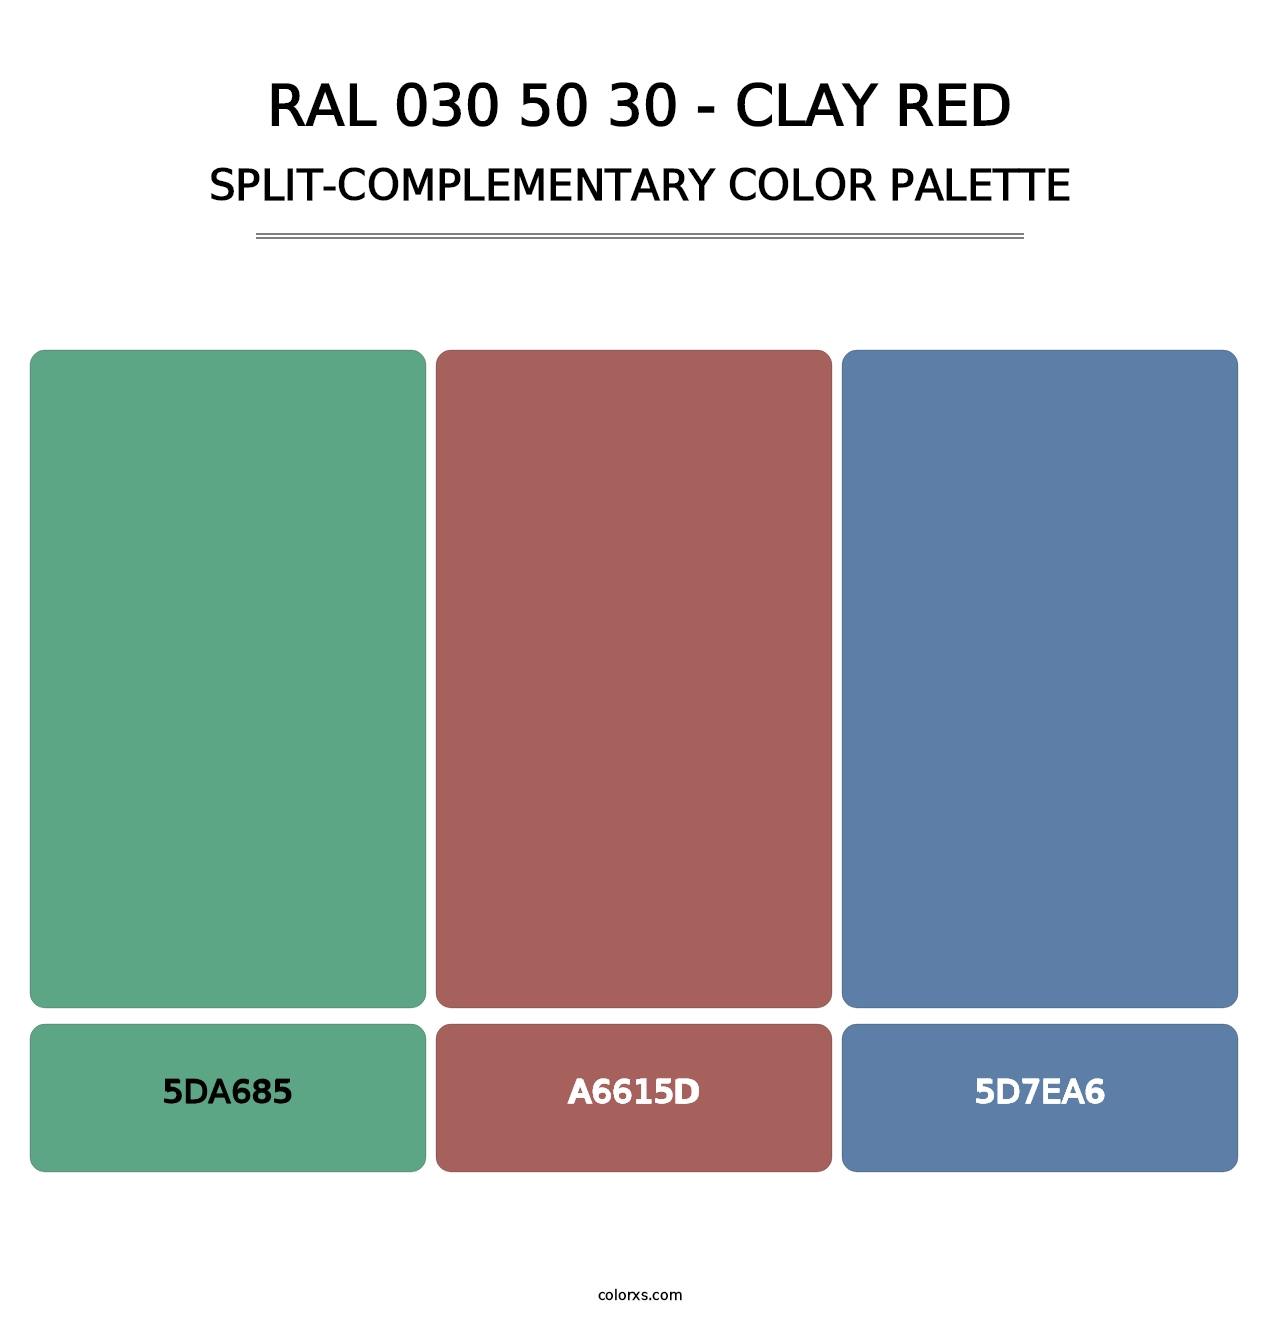 RAL 030 50 30 - Clay Red - Split-Complementary Color Palette